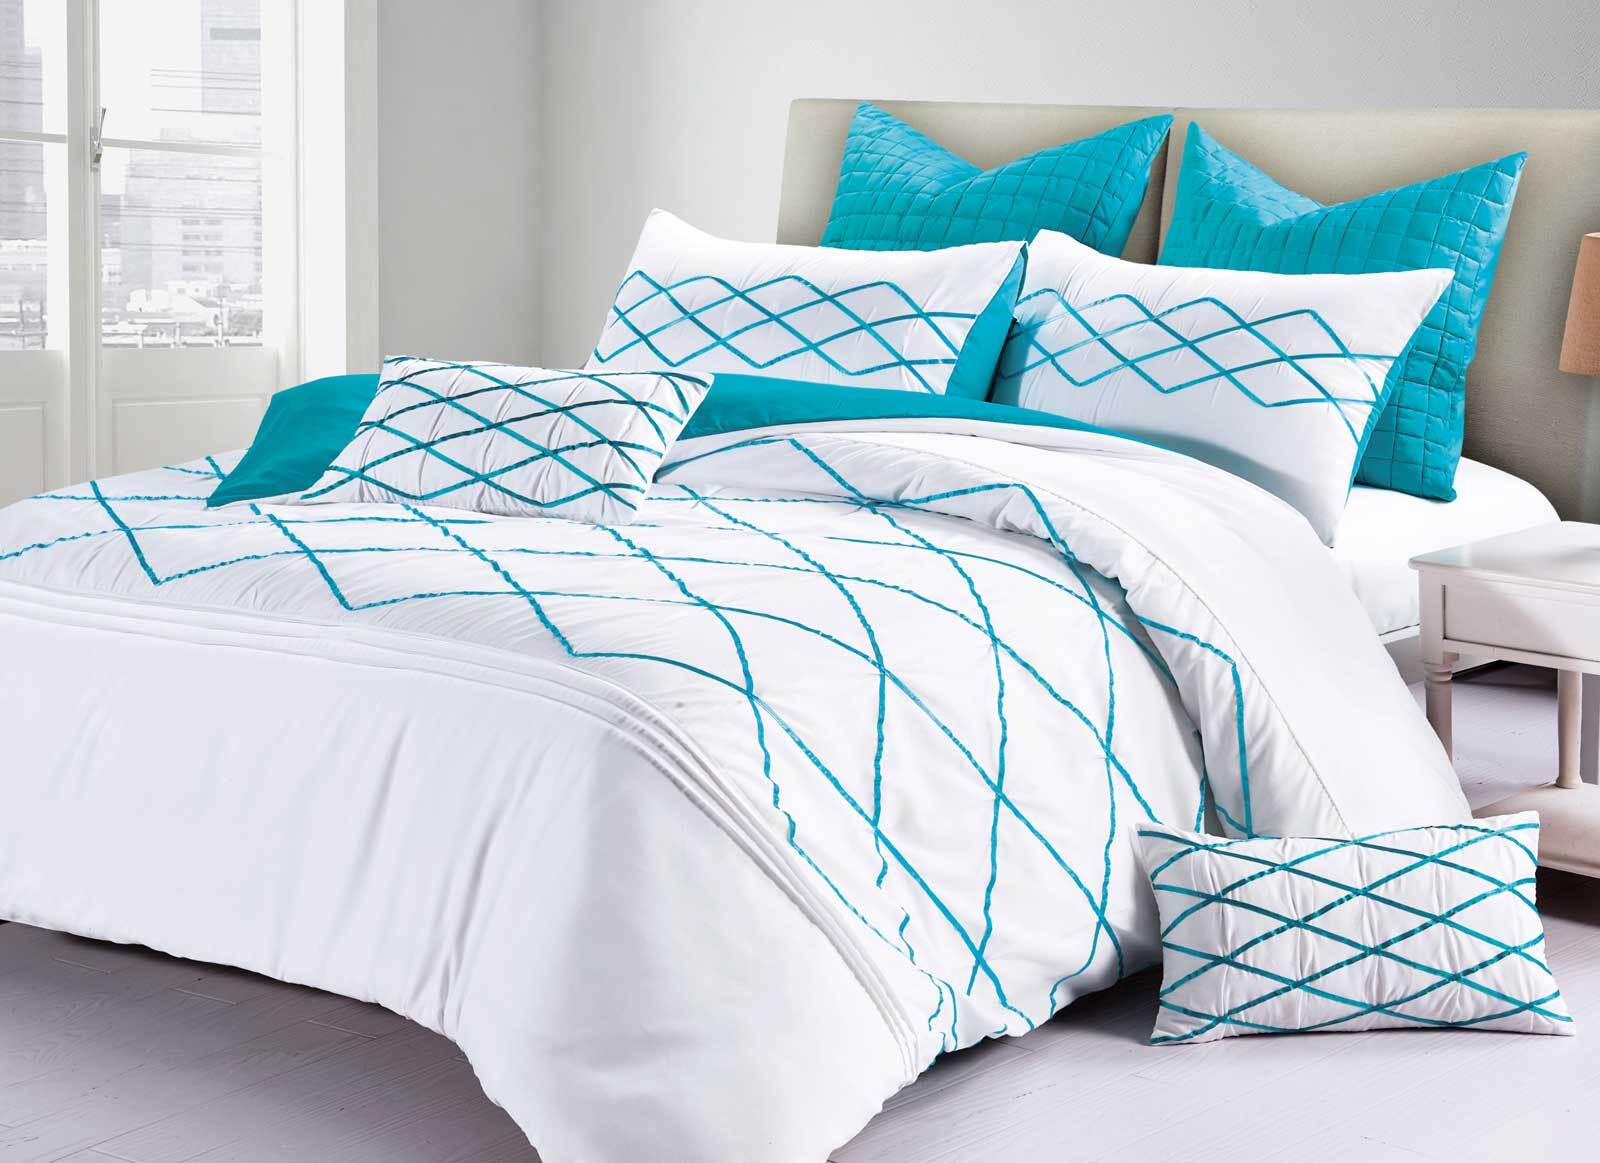 Luxton White Turquoise Blue 3pcs Adela Quilt Cover Set /Options( Queen / King / Super King / Optionals)